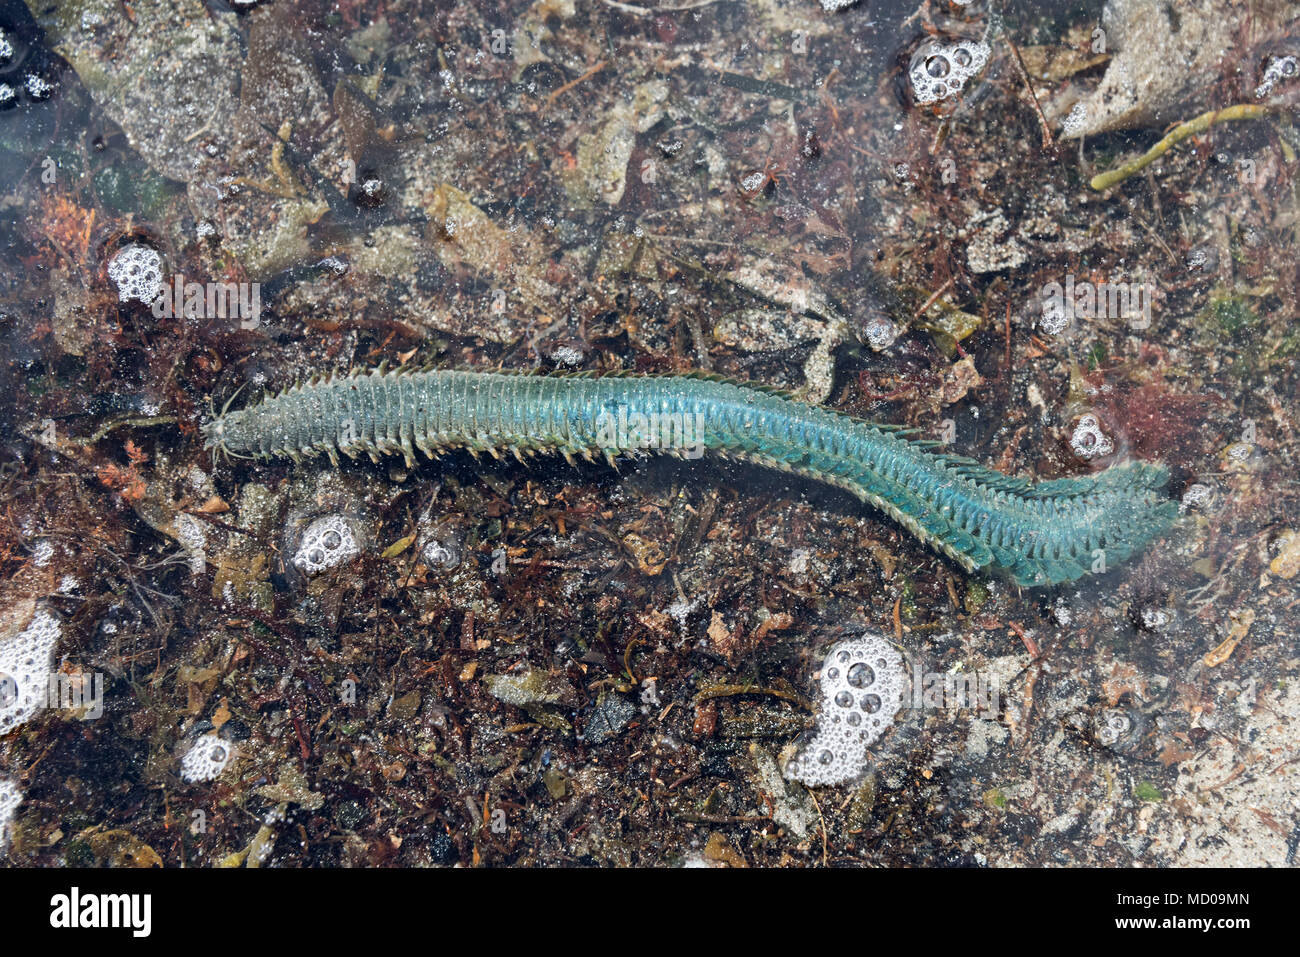 Clamworm (Nereis virens), Bracy Cove, Seal Harbour, Maine, USA Banque D'Images